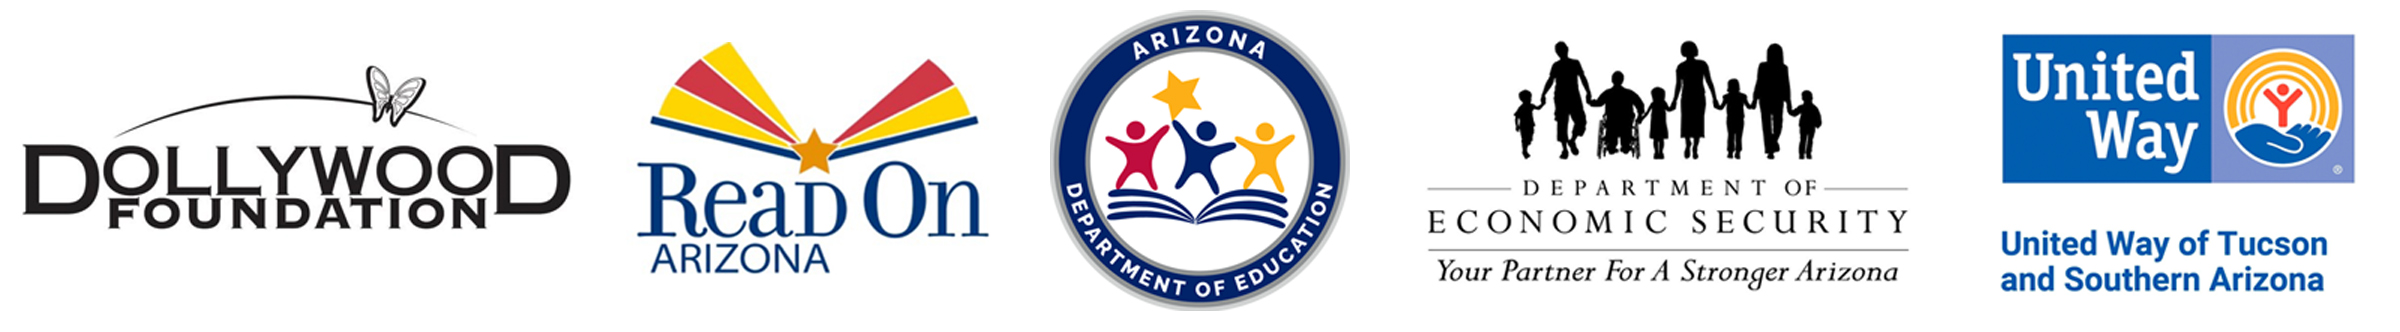 ADE Read On DES United Way of Tucson and Southern Arizona logos